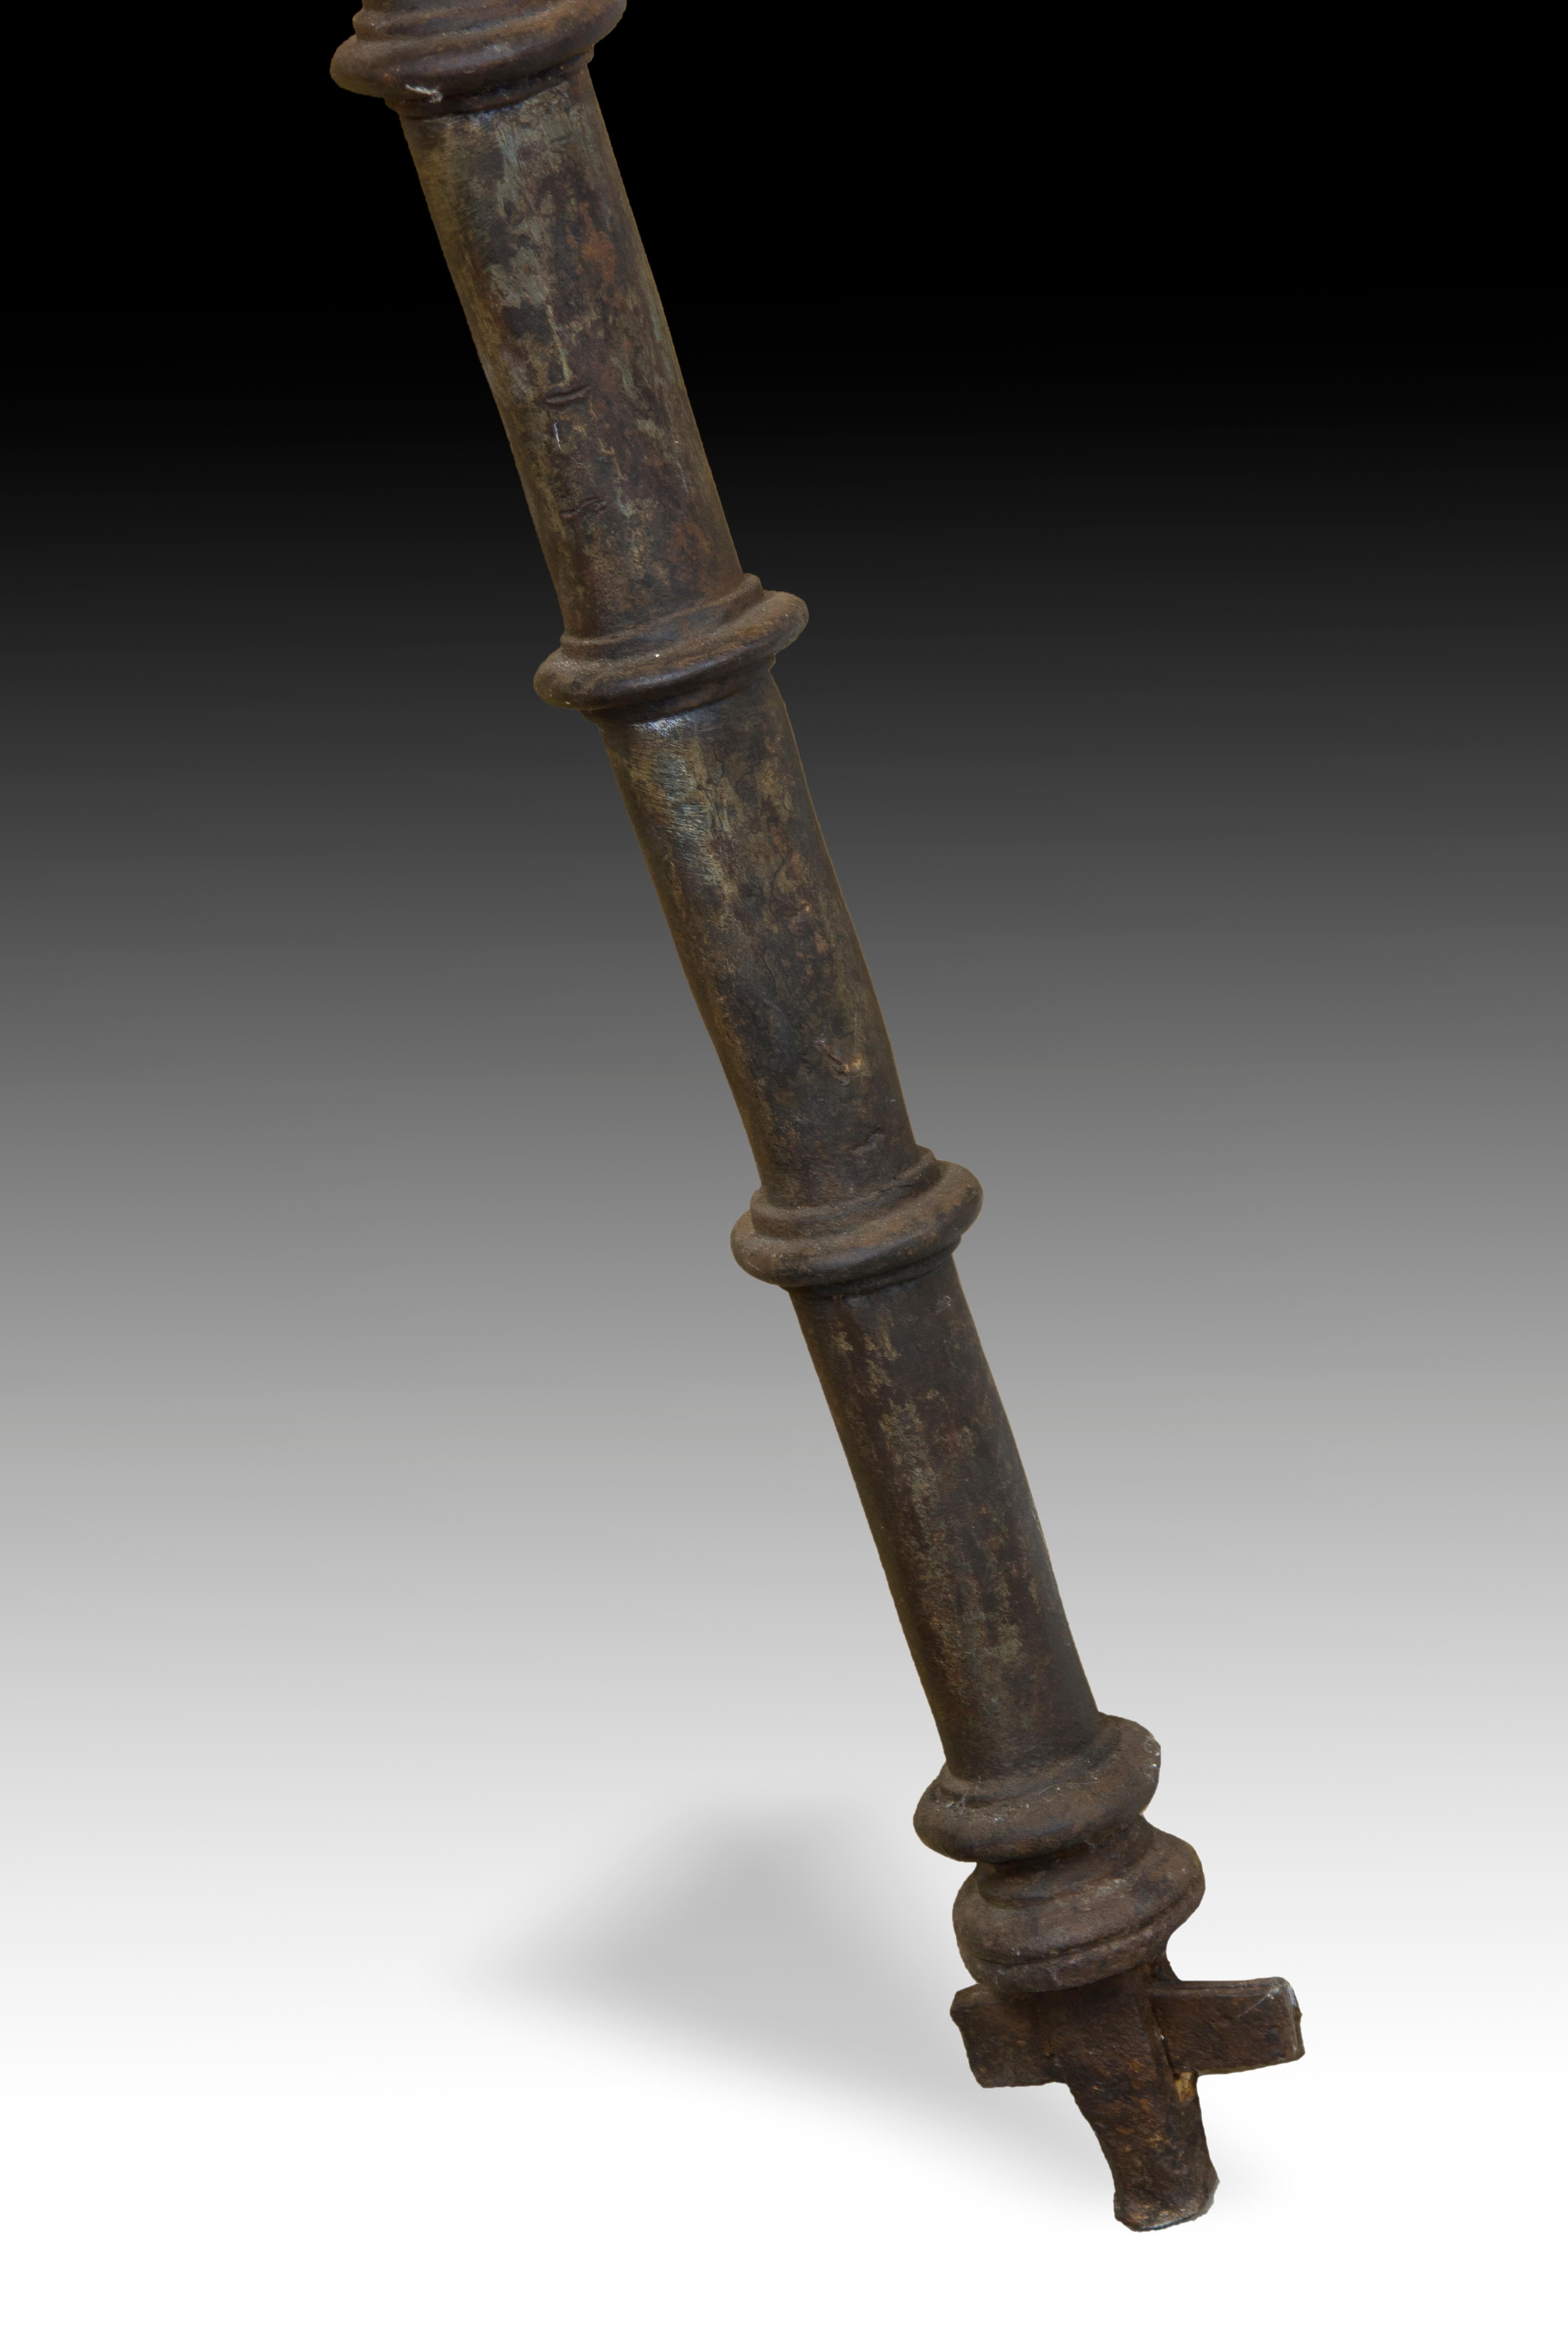 Baroque Wrought Iron Banister, 17th Century